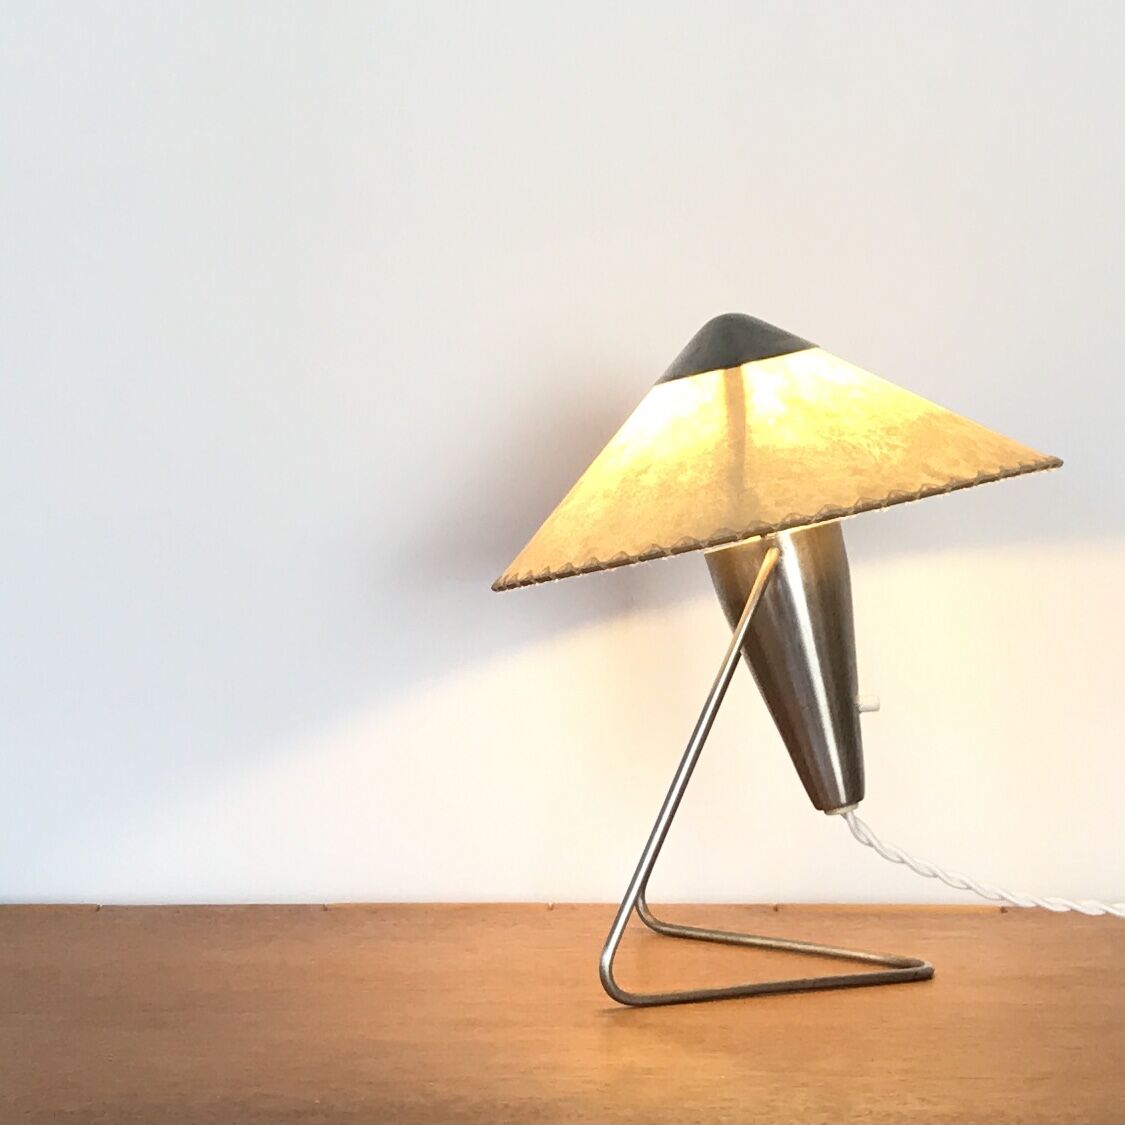 N-30 “Chinese Woman” Table Lamp / Helena Franto